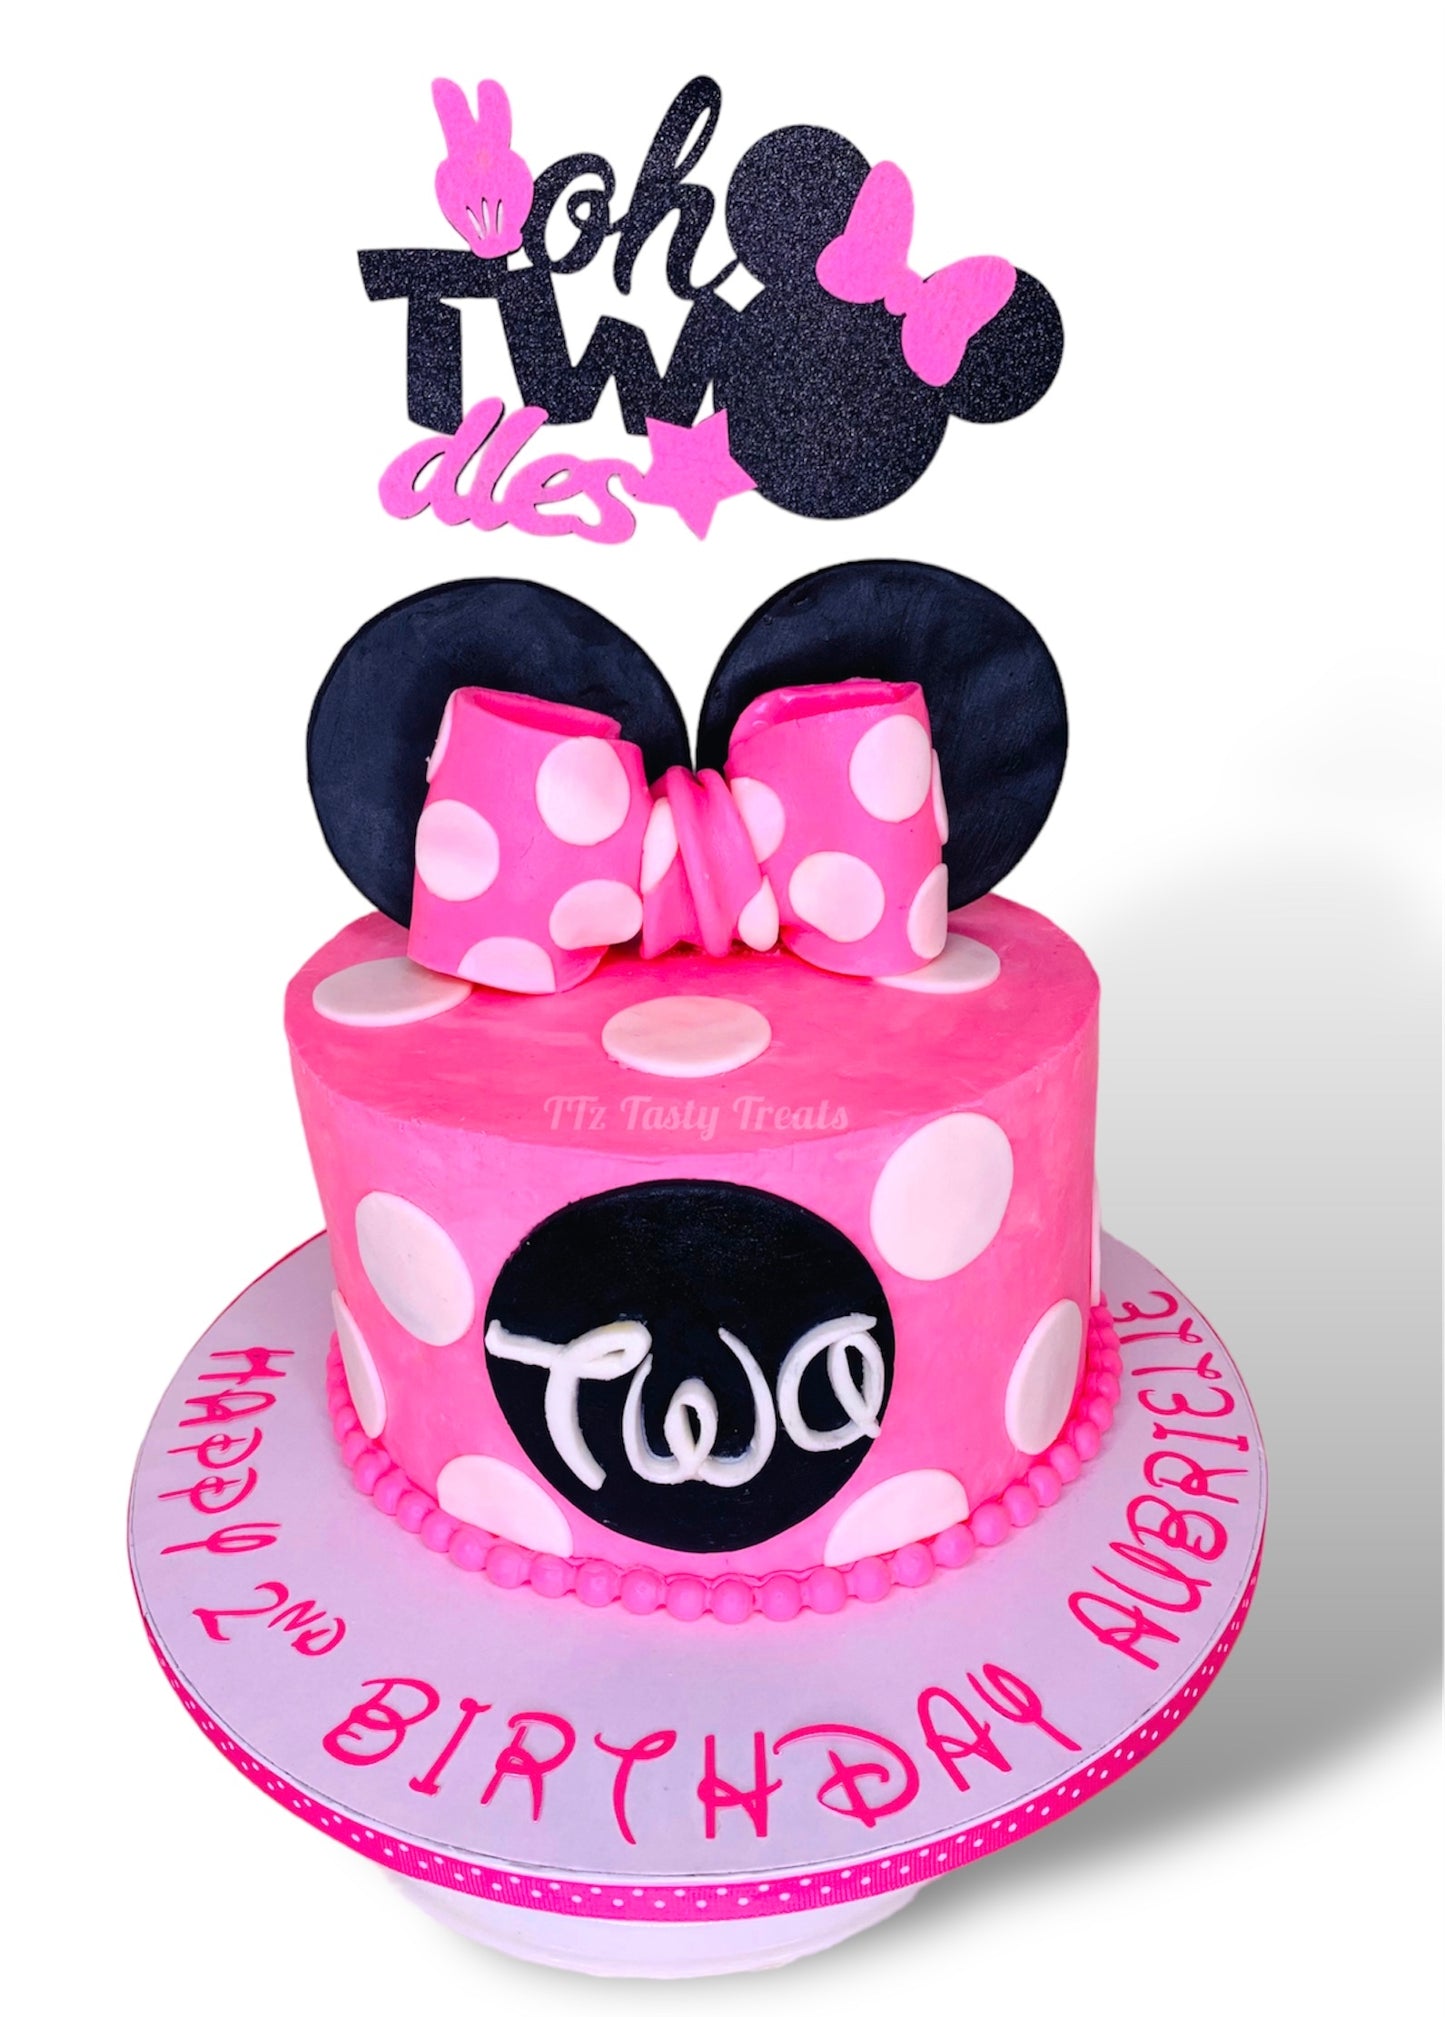 Oh, Twodles Minne cake